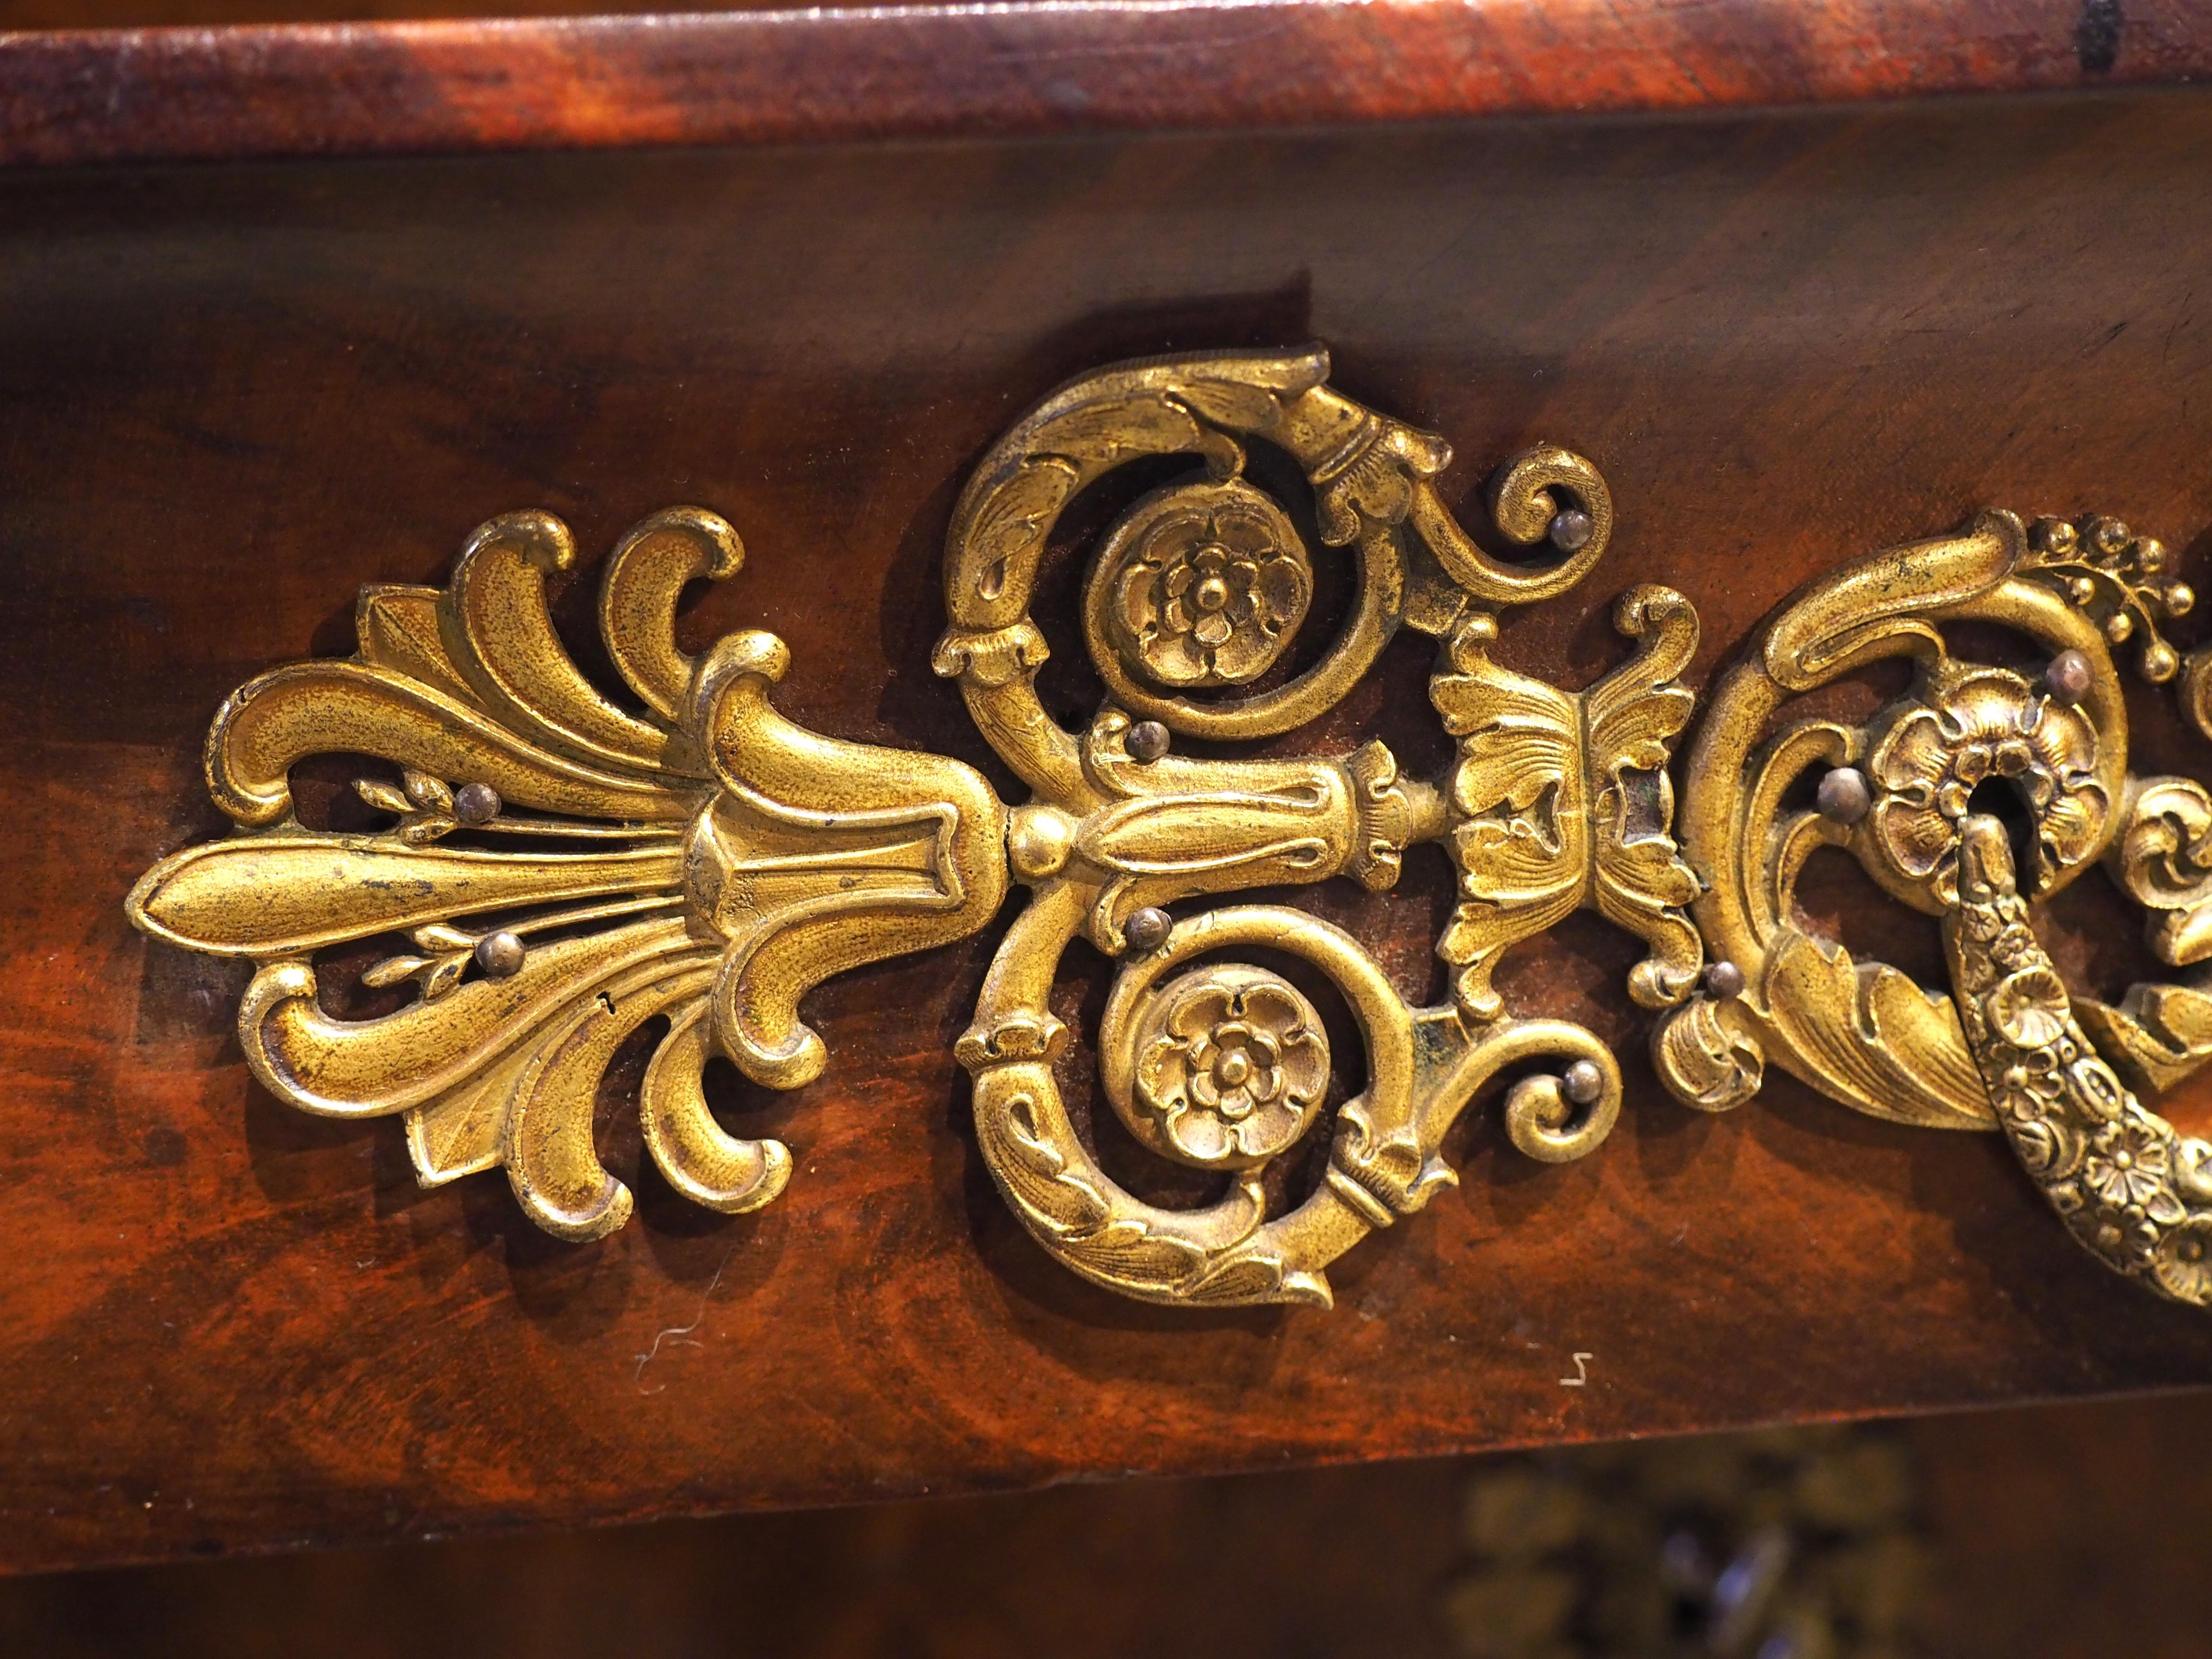 Circa 1820 French Restauration Commode in Flame Mahogany, Gilt Bronze Hardware For Sale 2